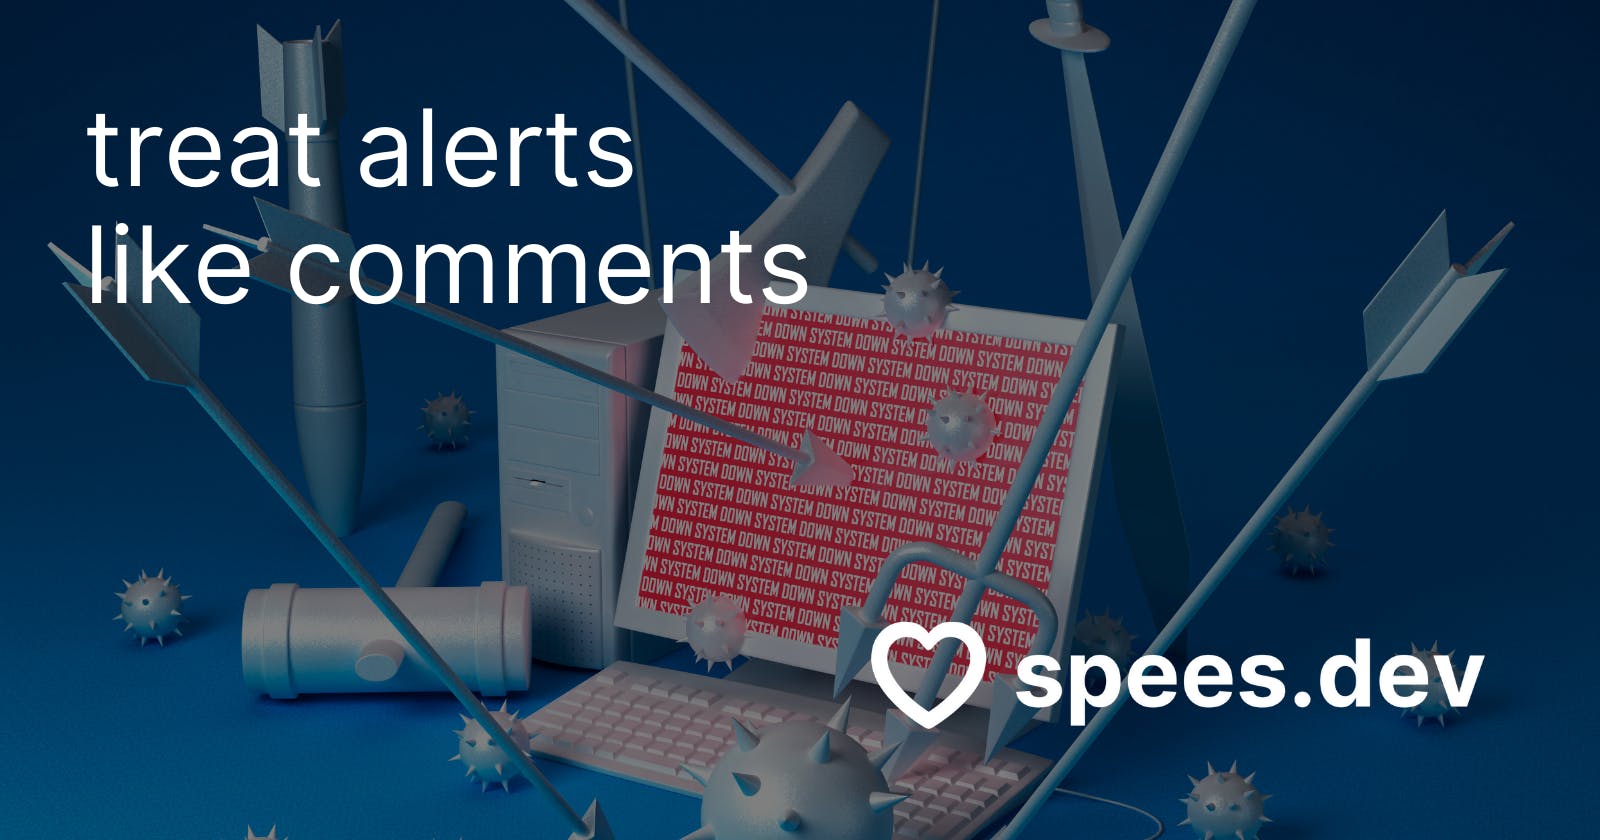 treat alerts like comments